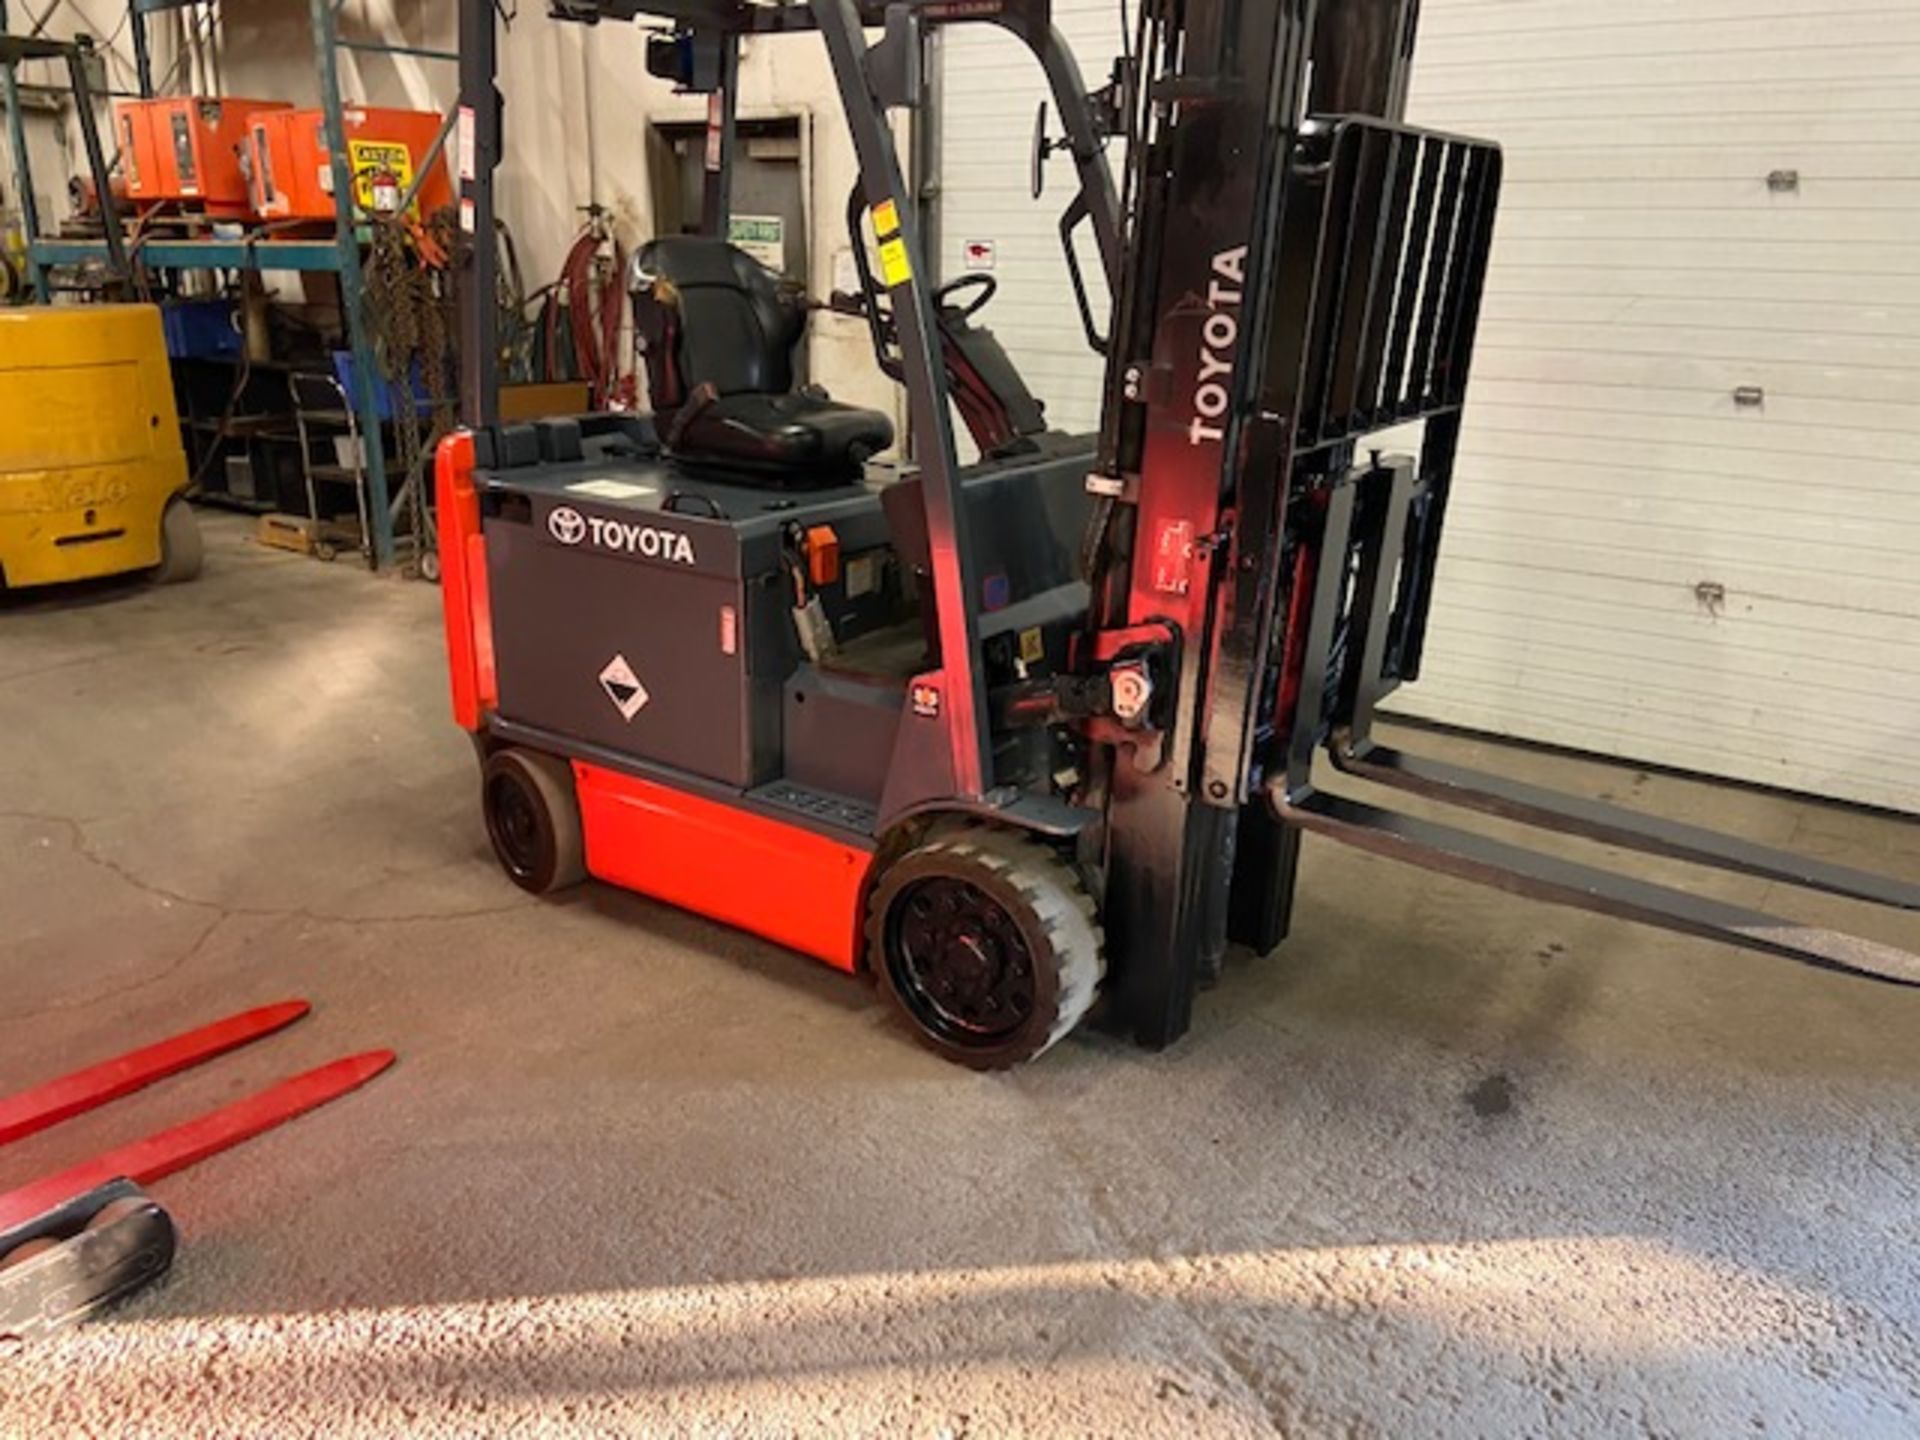 FREE CUSTOMS - 2014 Toyota 6000lbs Electric Forklift with sideshift and 3-stage mast 36V